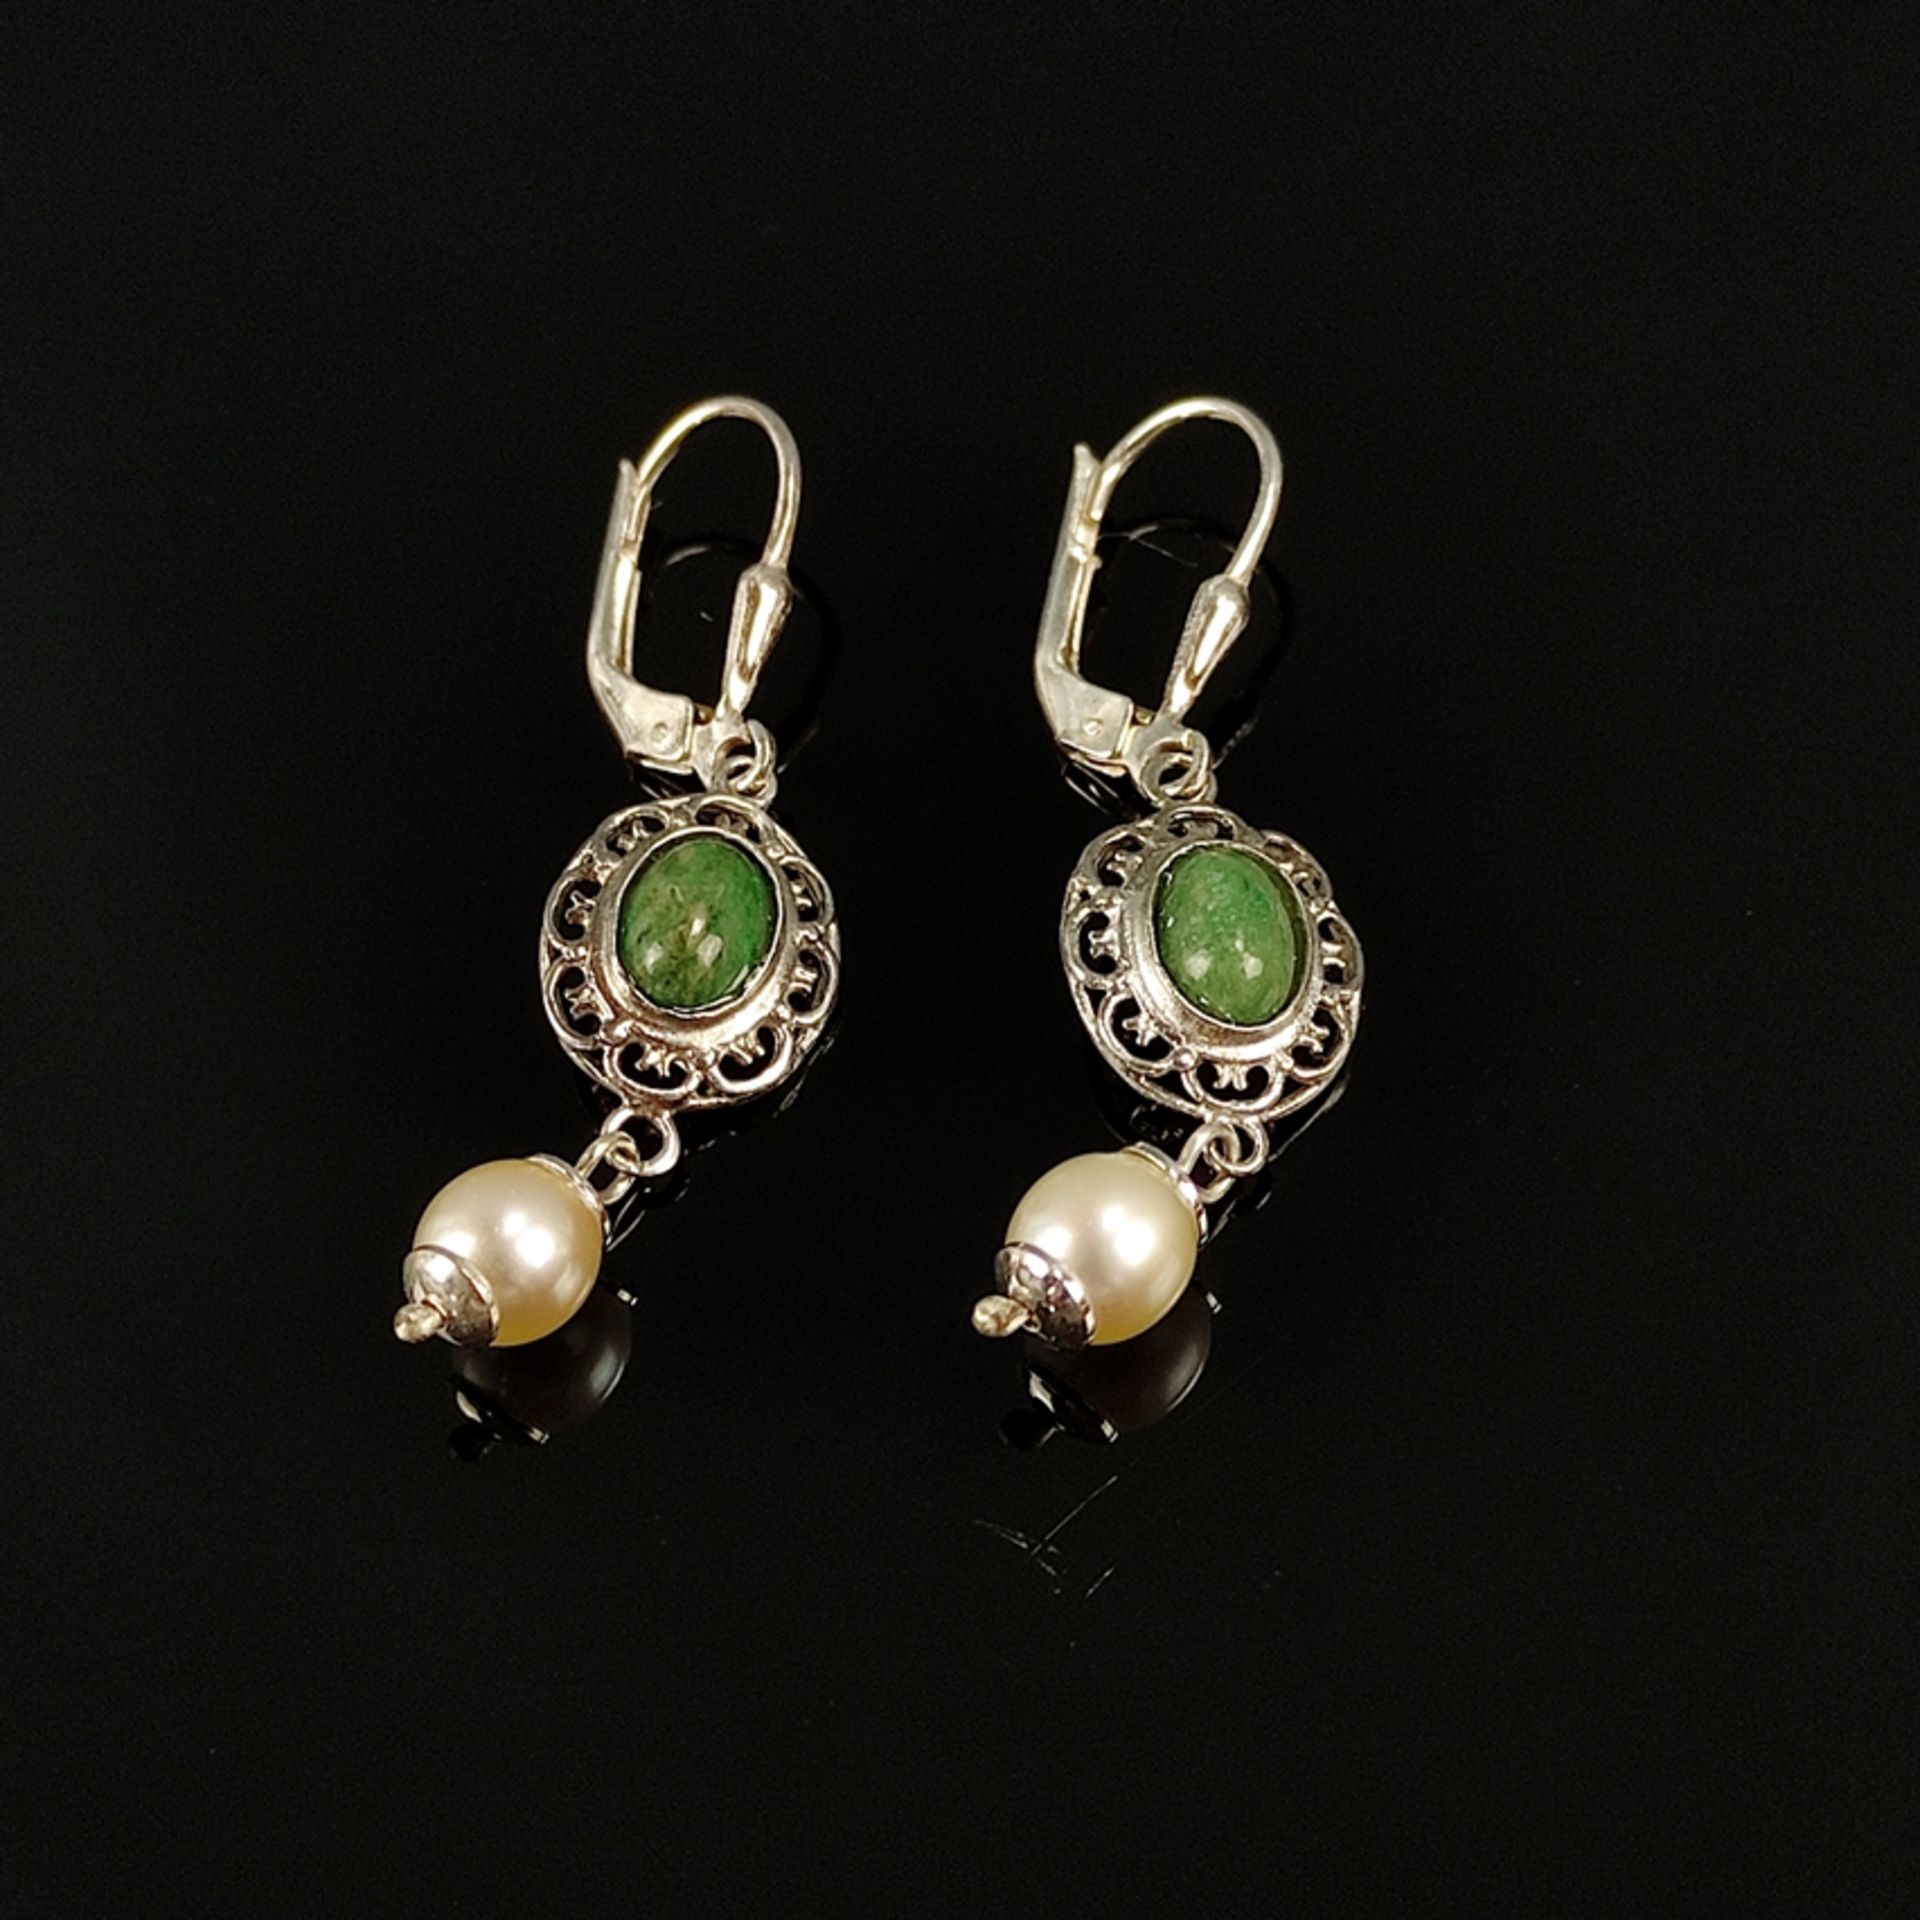 Jade-pearl earrings, silver 925, hinged earwire with reliefed oval suspensions set with oval caboch